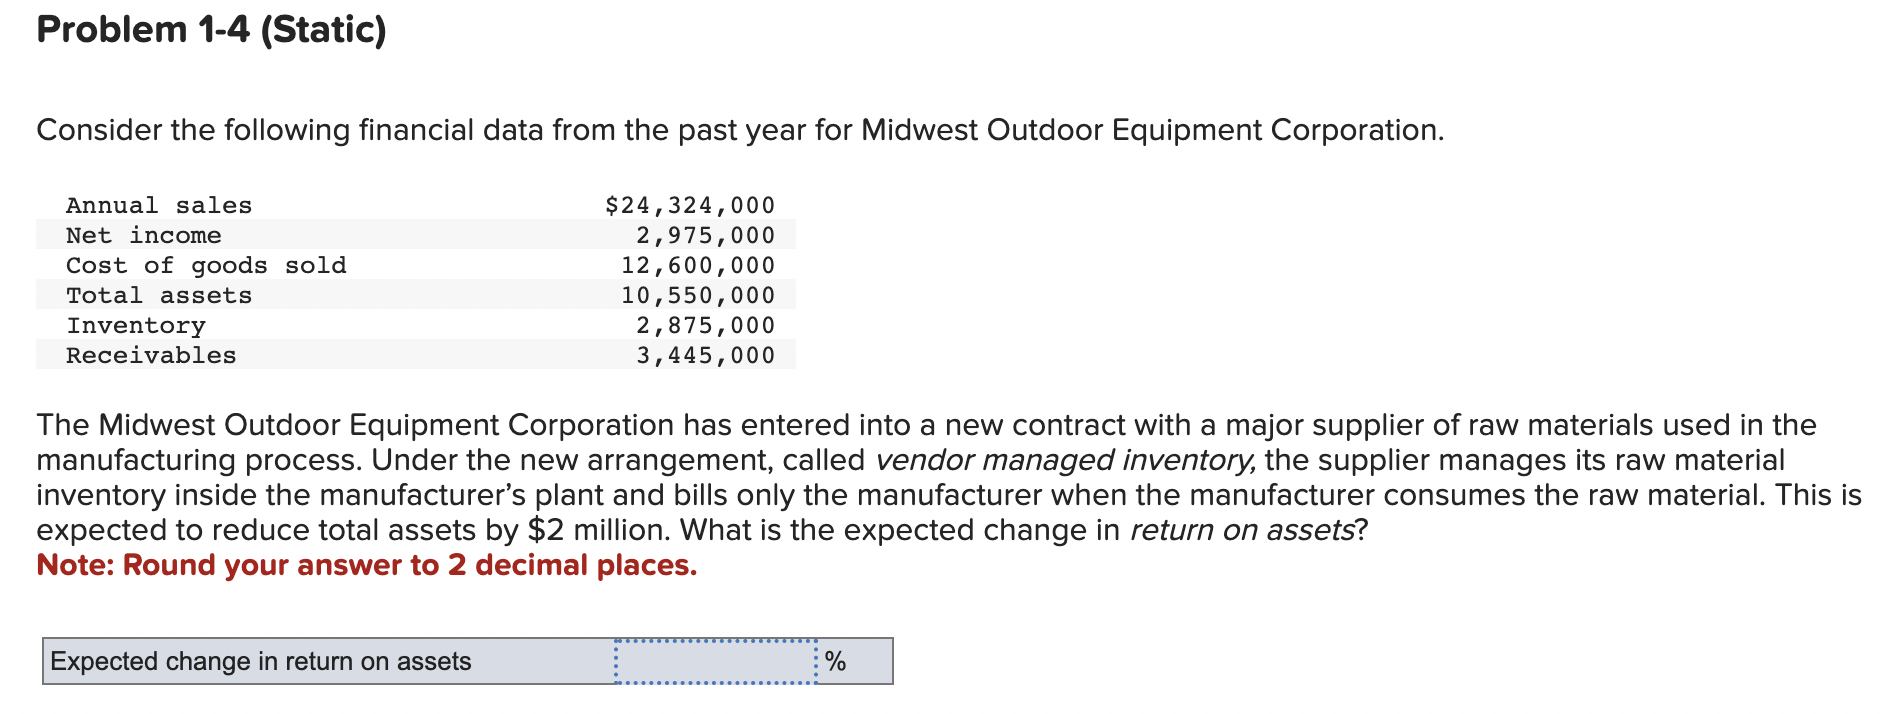 Consider the following financial data from the past year for Midwest Outdoor Equipment Corporation.
The Midwest Outdoor Equip